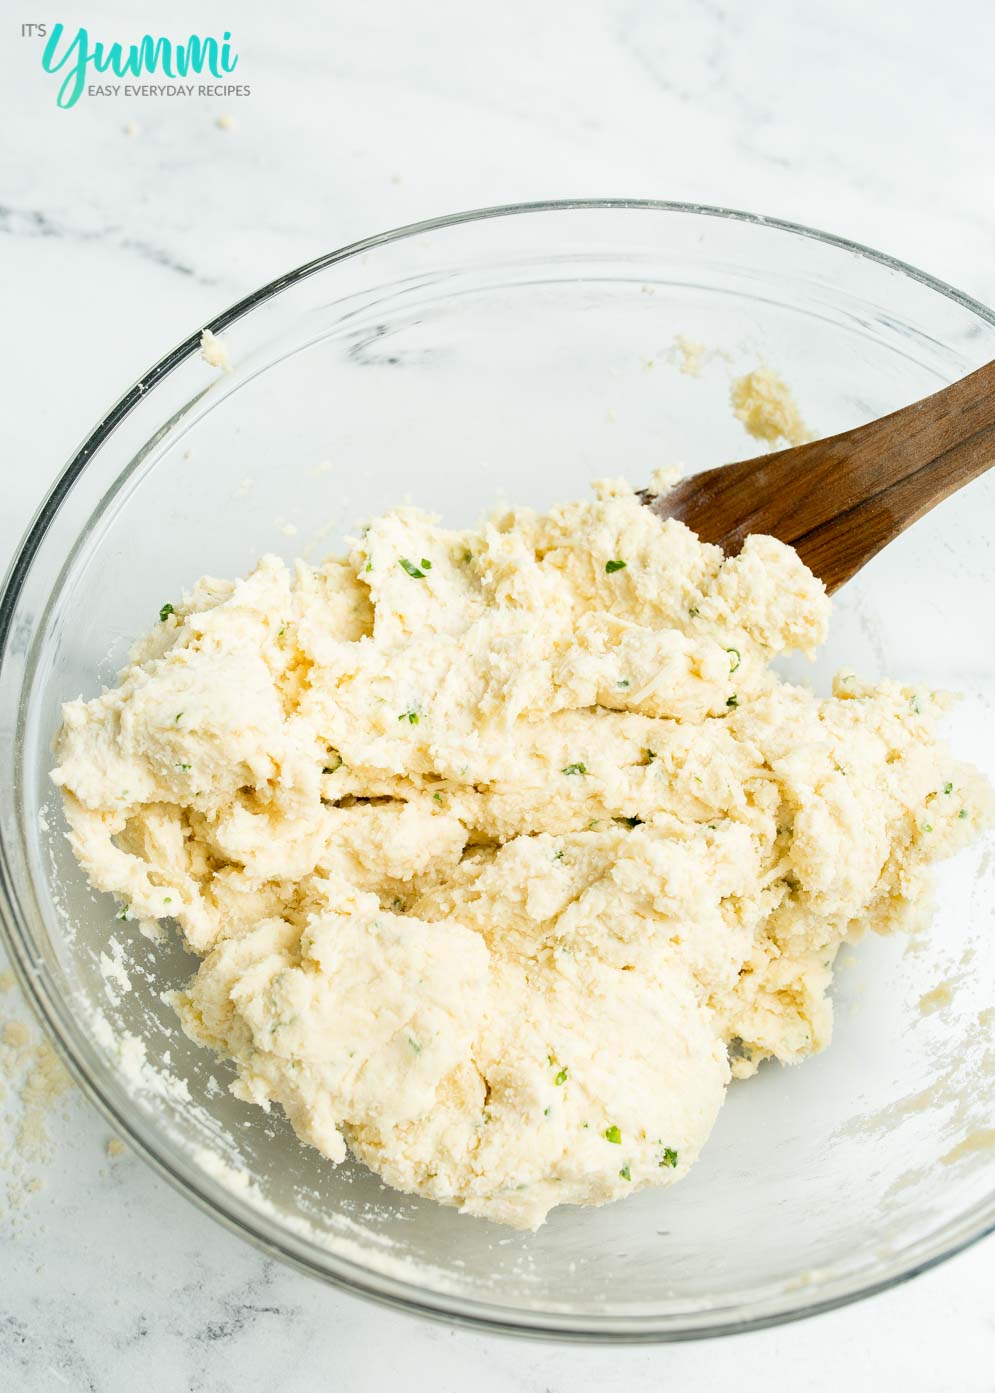 Bowl of cheddar bay biscuit dough